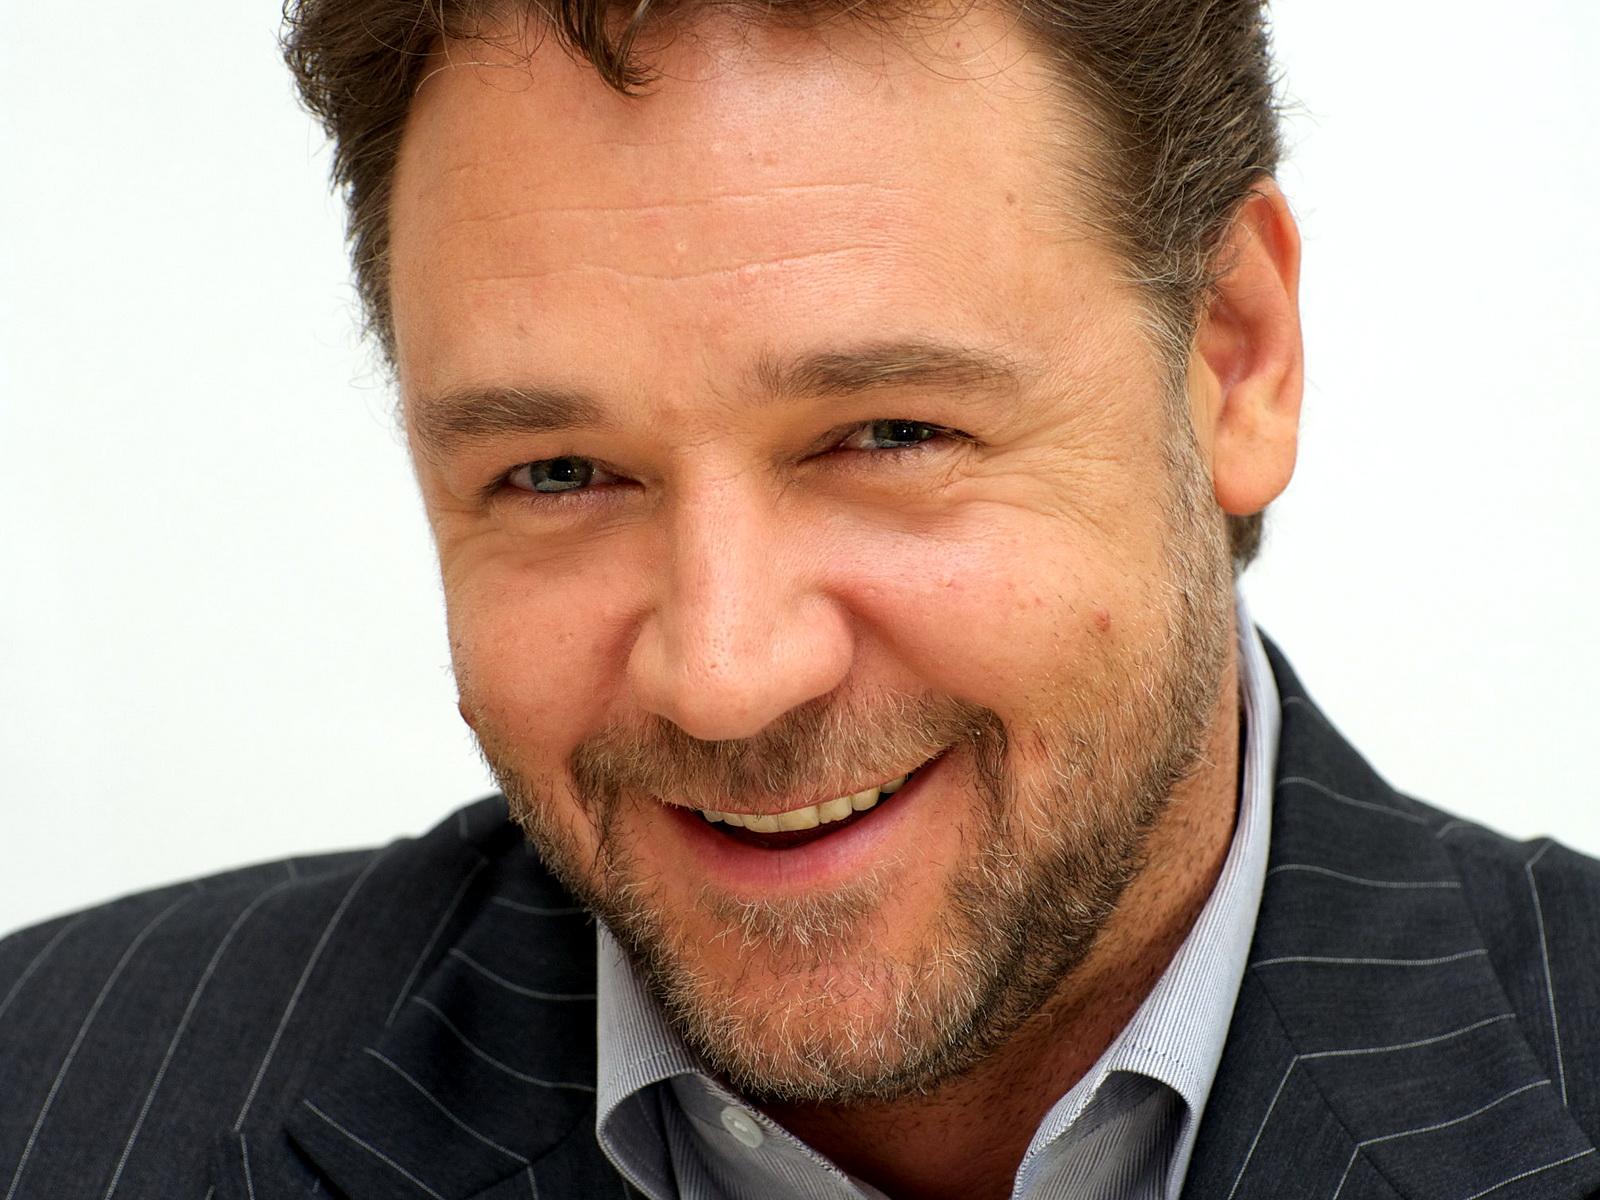 Russell Crowe Smile Wallpaper 52383 1600x1200 px